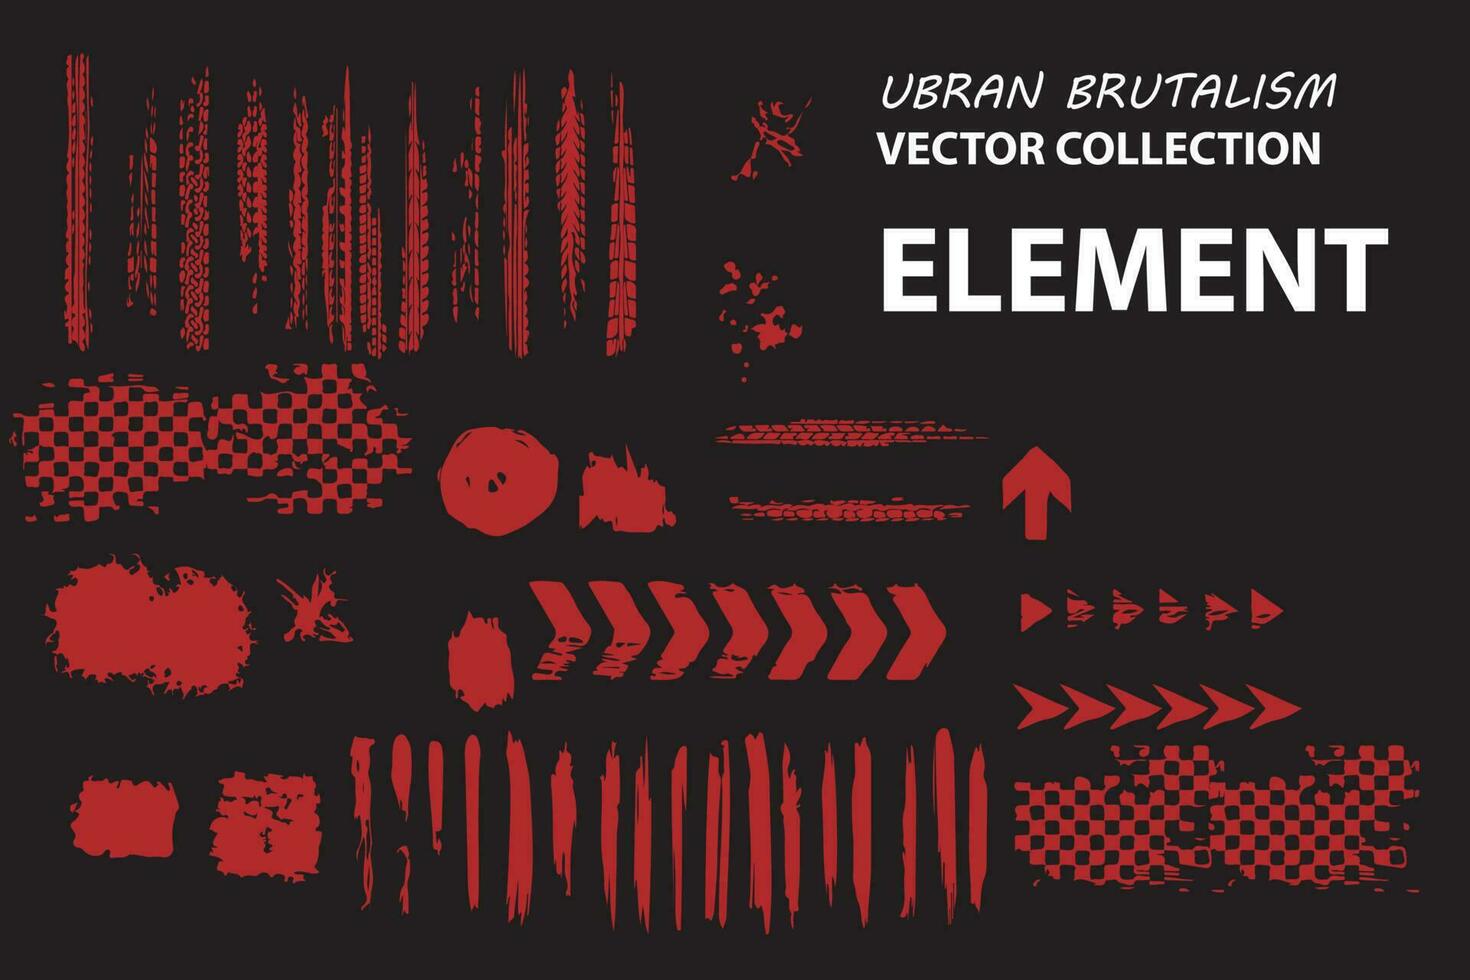 trendy urban design collection brutalism graphic shapes, emblems crime urban life, abstract geometric shapes, merch, t-shirt, typographic and prints. Acid, brutalism, underground. Vector illustration